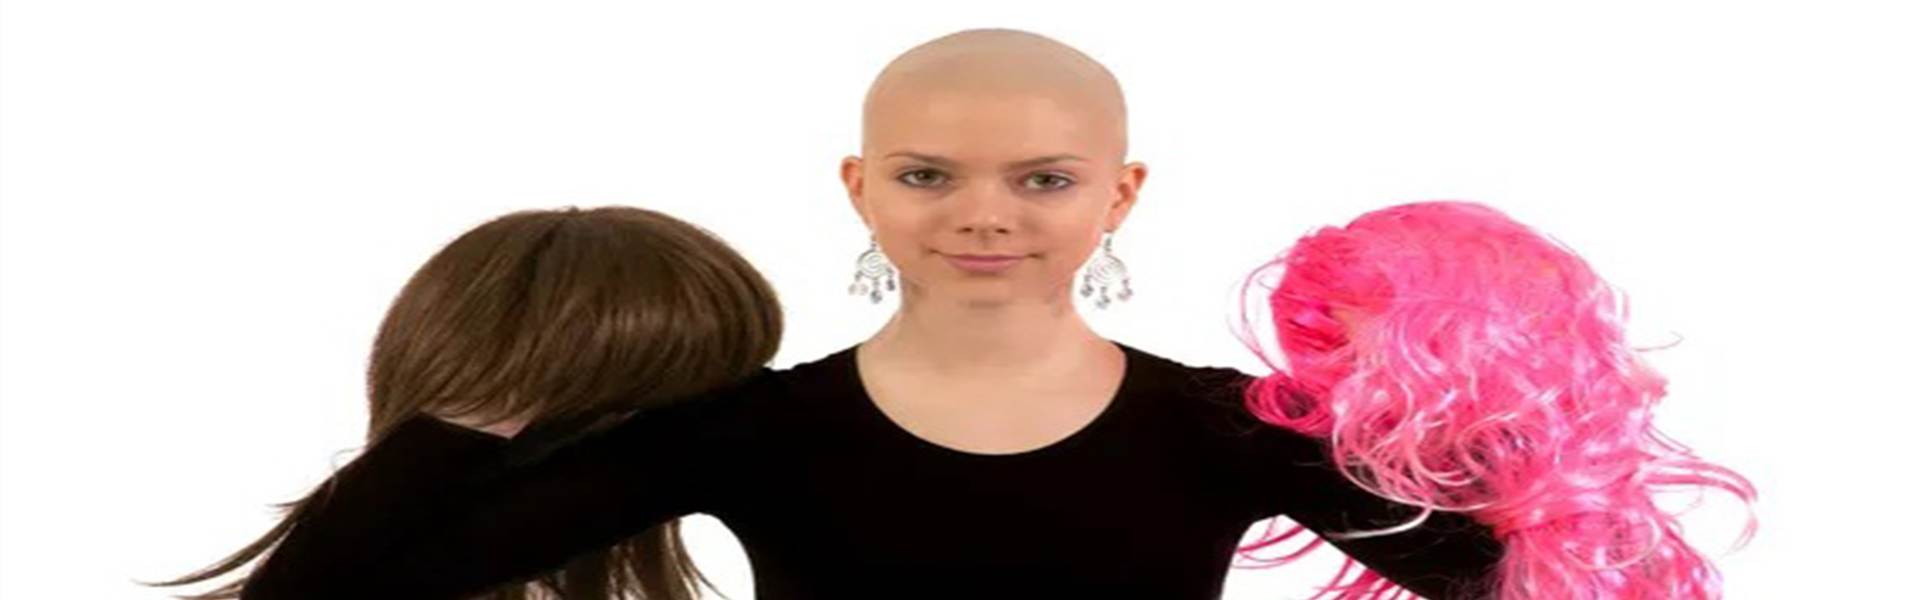 Wigs for Cancer Patients in Gurgaon | Wigs for Chemo Patients in Gurgaon